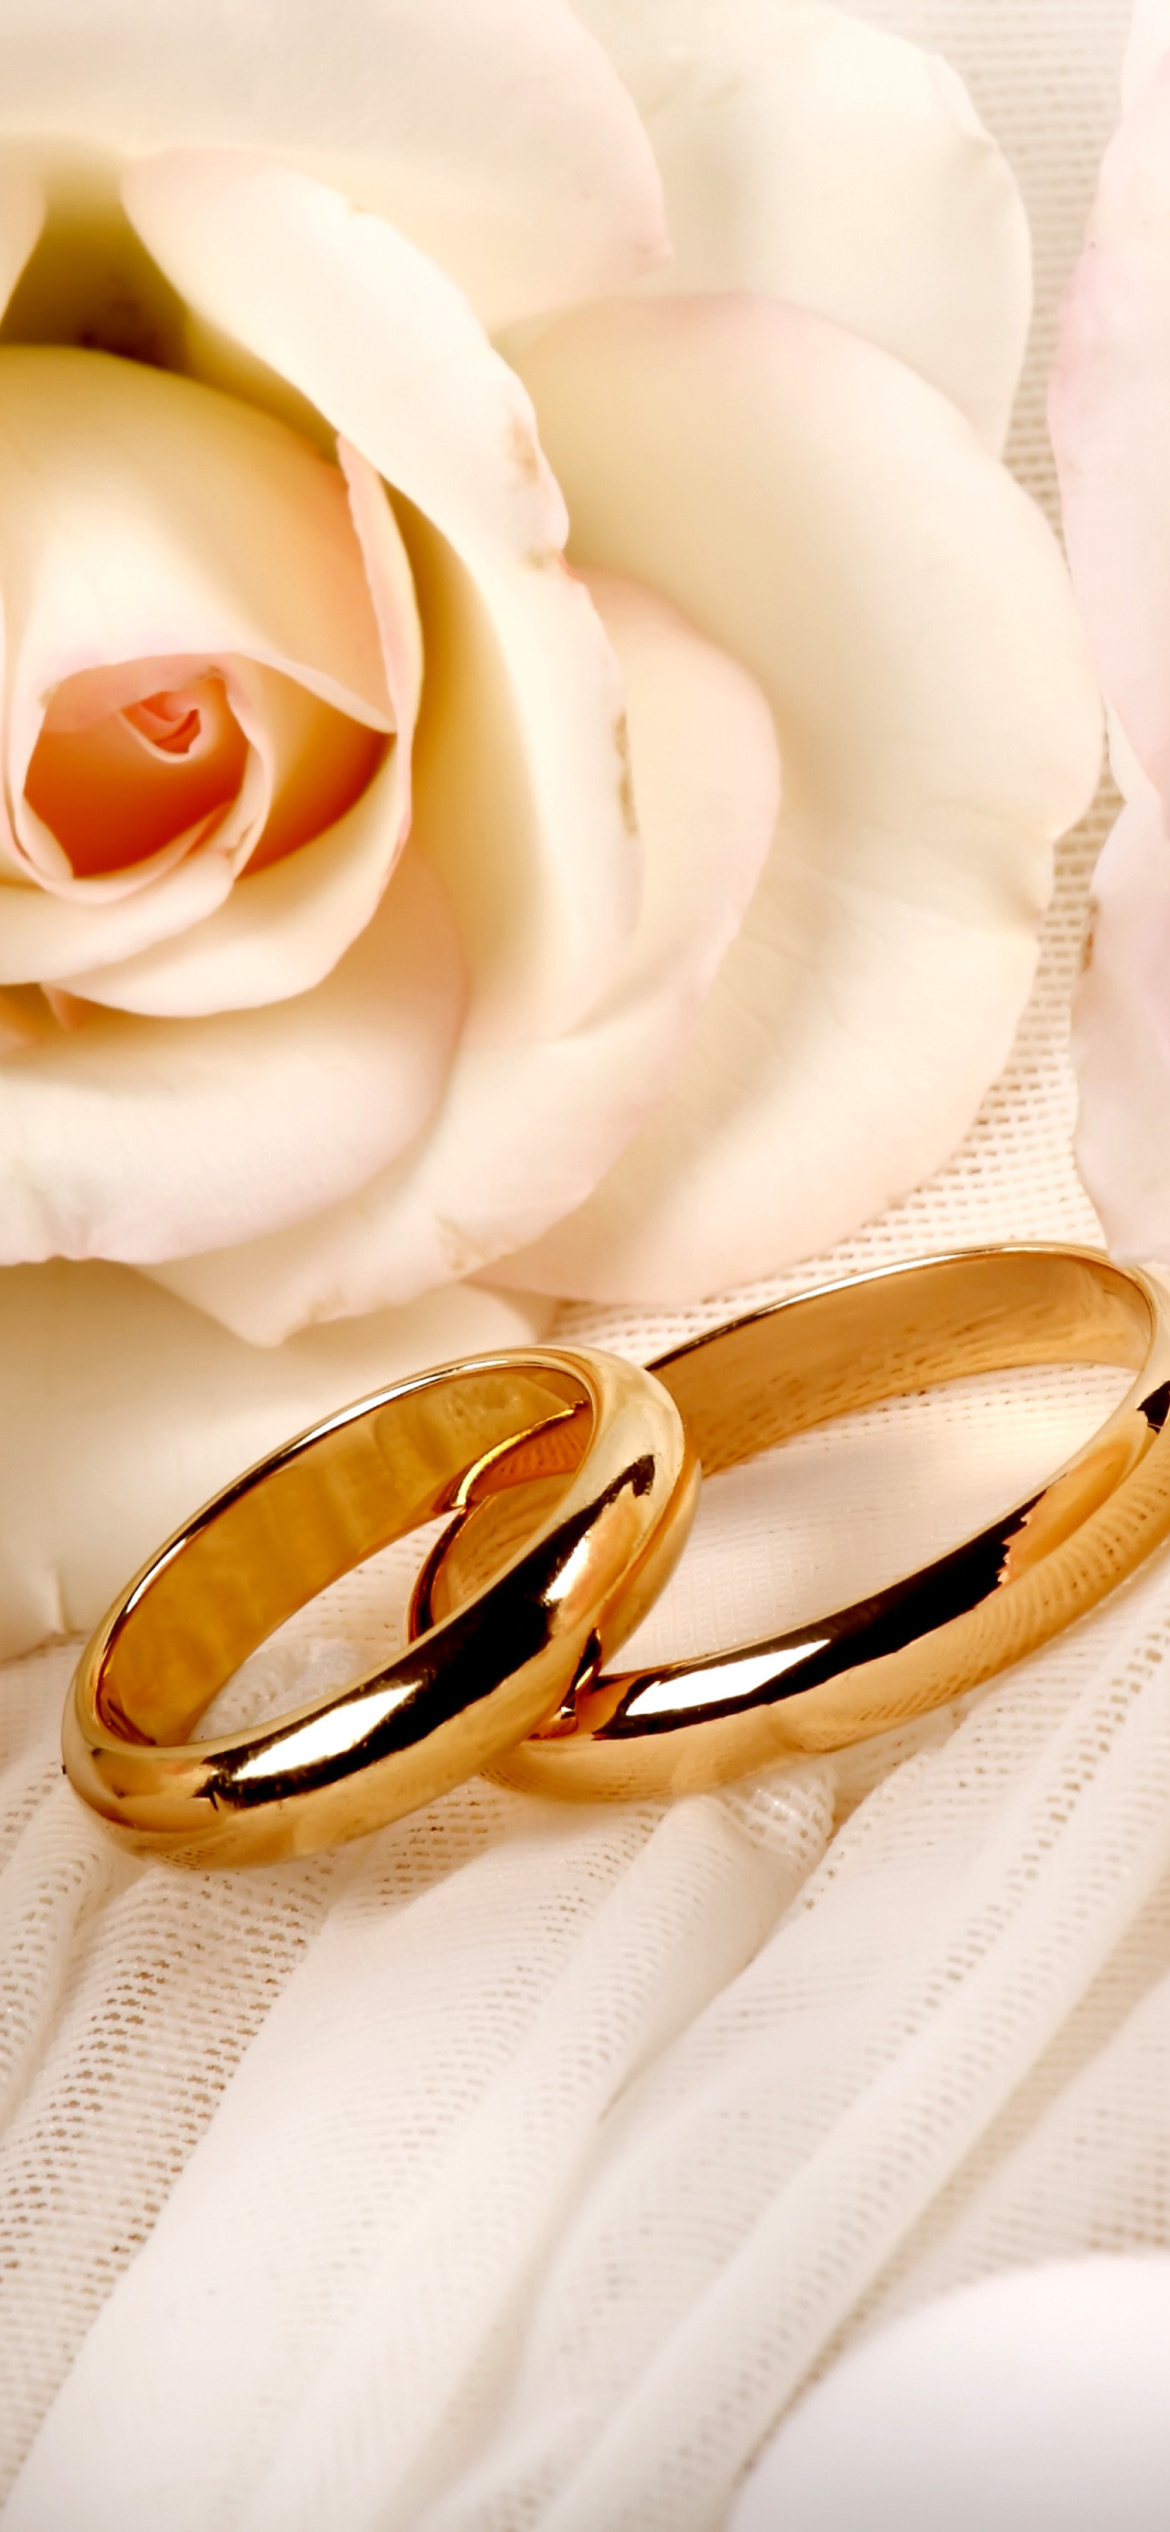 Roses and Wedding Rings wallpaper 1170x2532